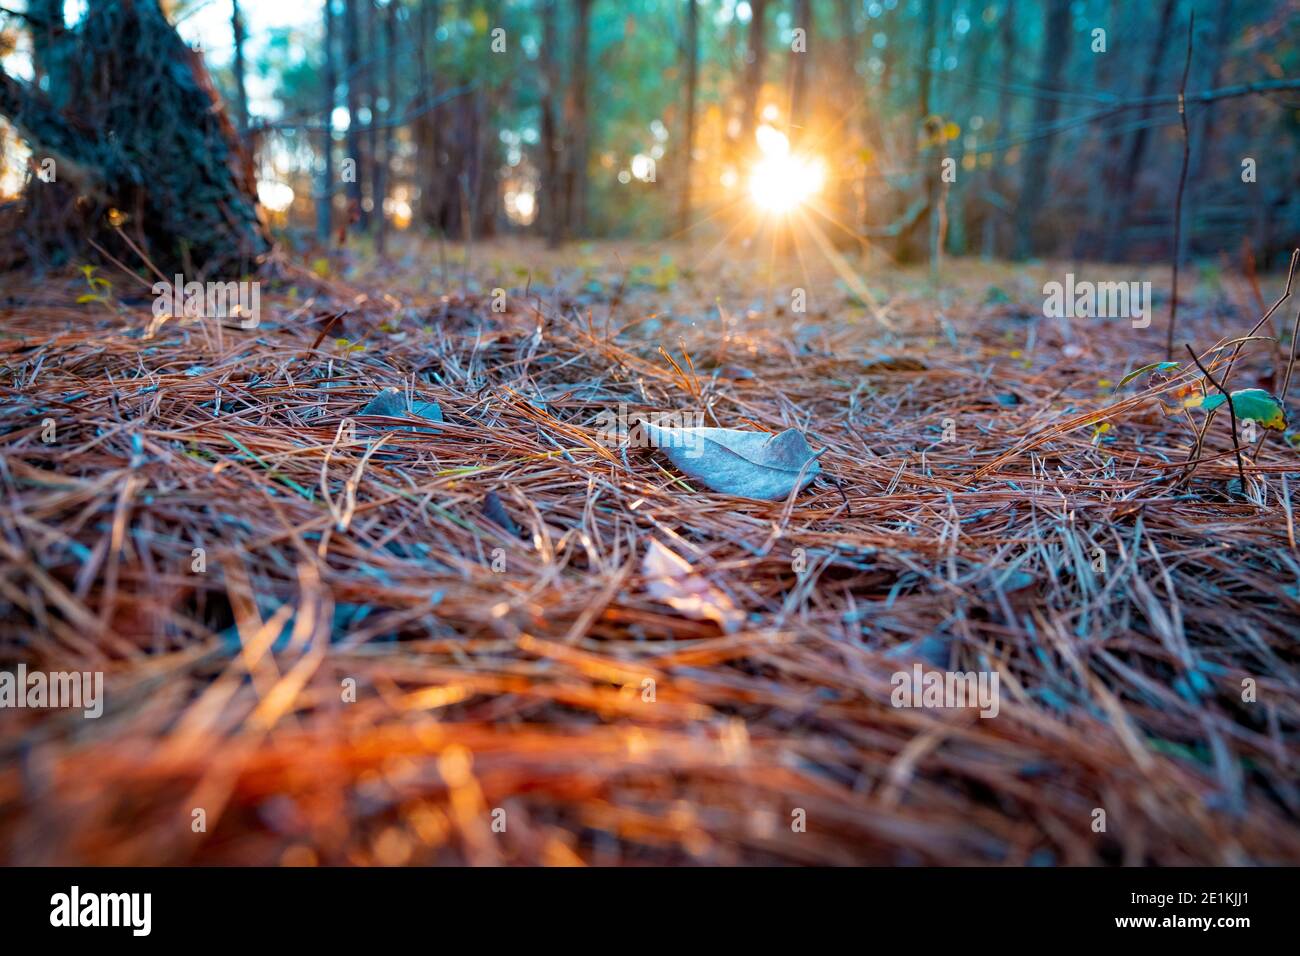 Plant A Tree Program Earth Conservation Grown Sunset Stock Photo